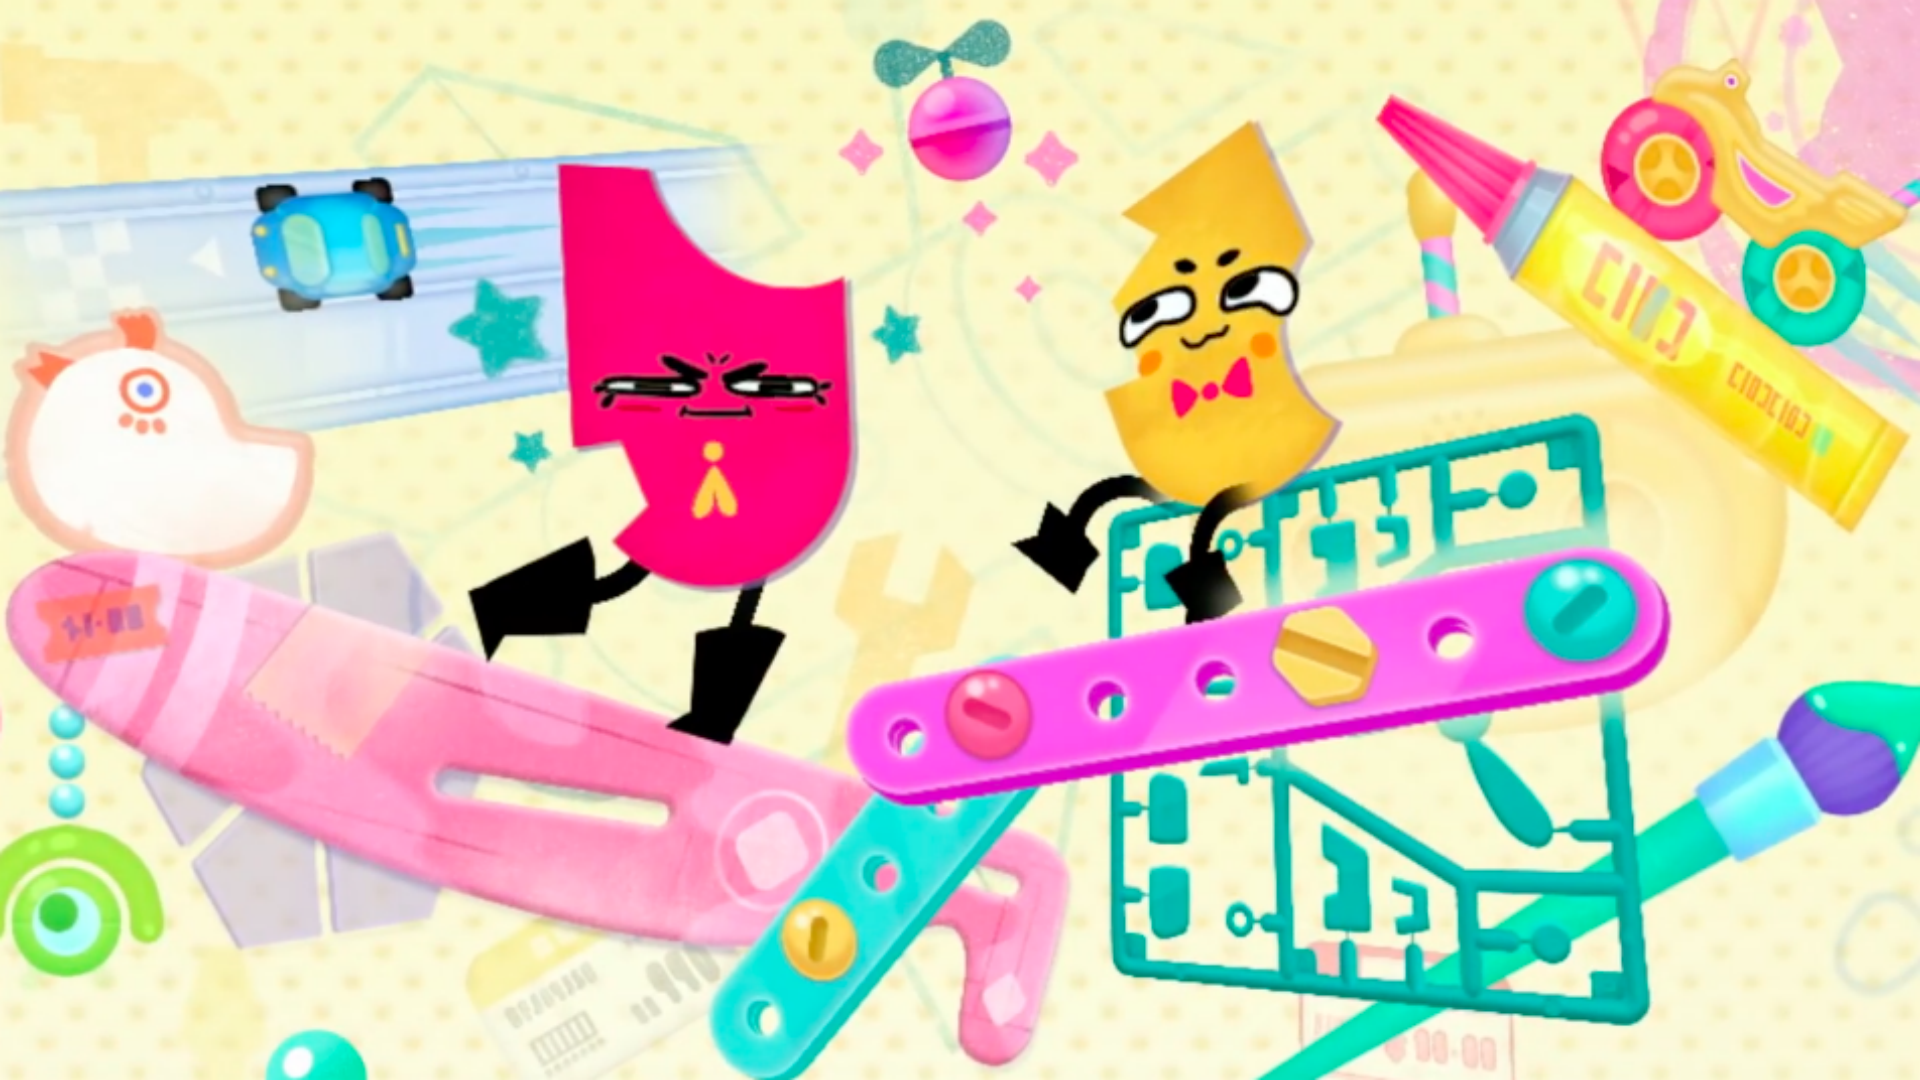 Snipperclips coming to Super Smash Bros. Ultimate